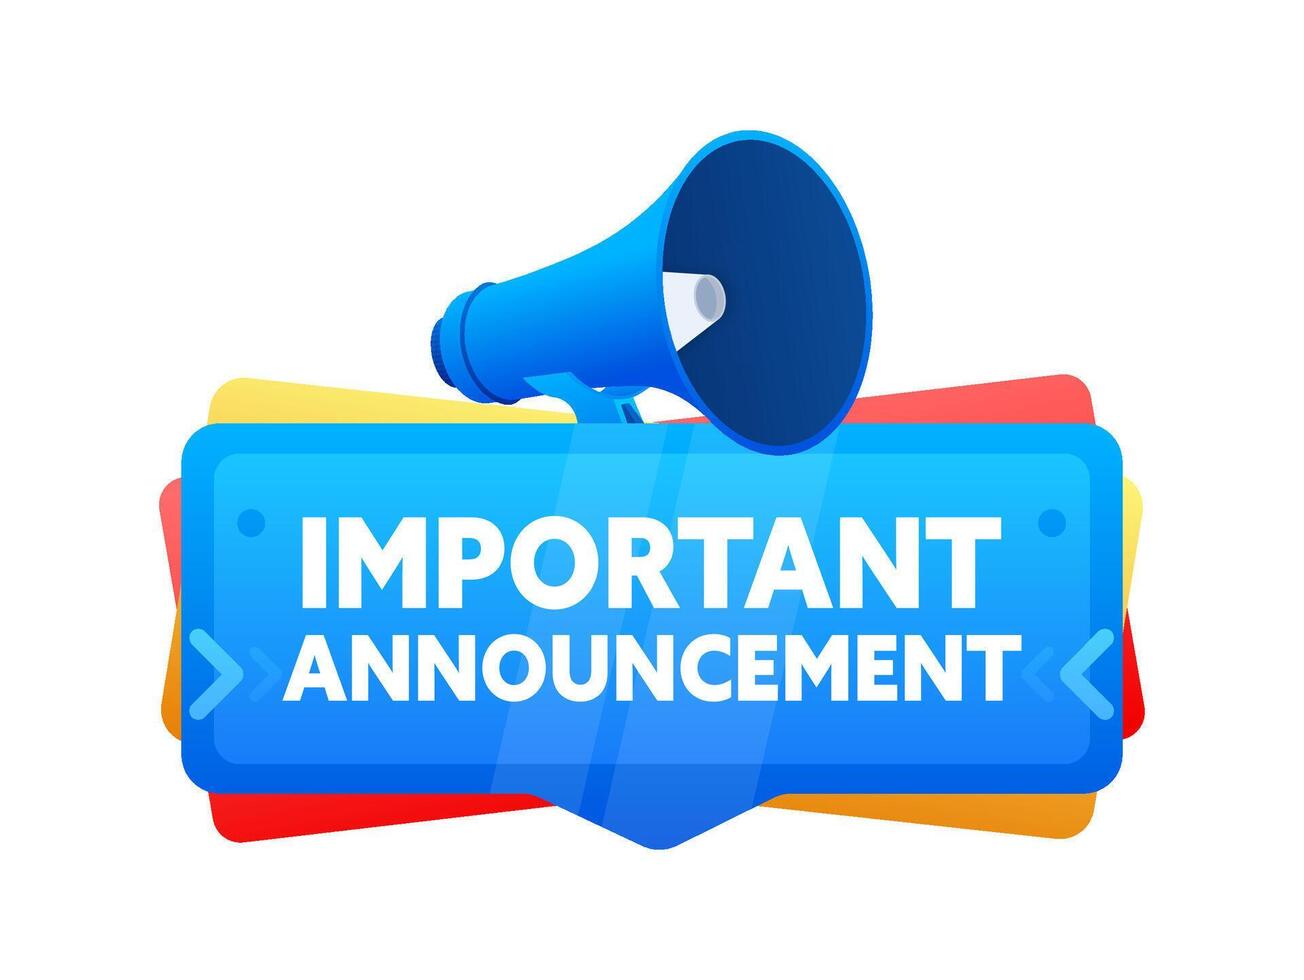 Megaphone projecting an important announcement against a white background. Vector illustration